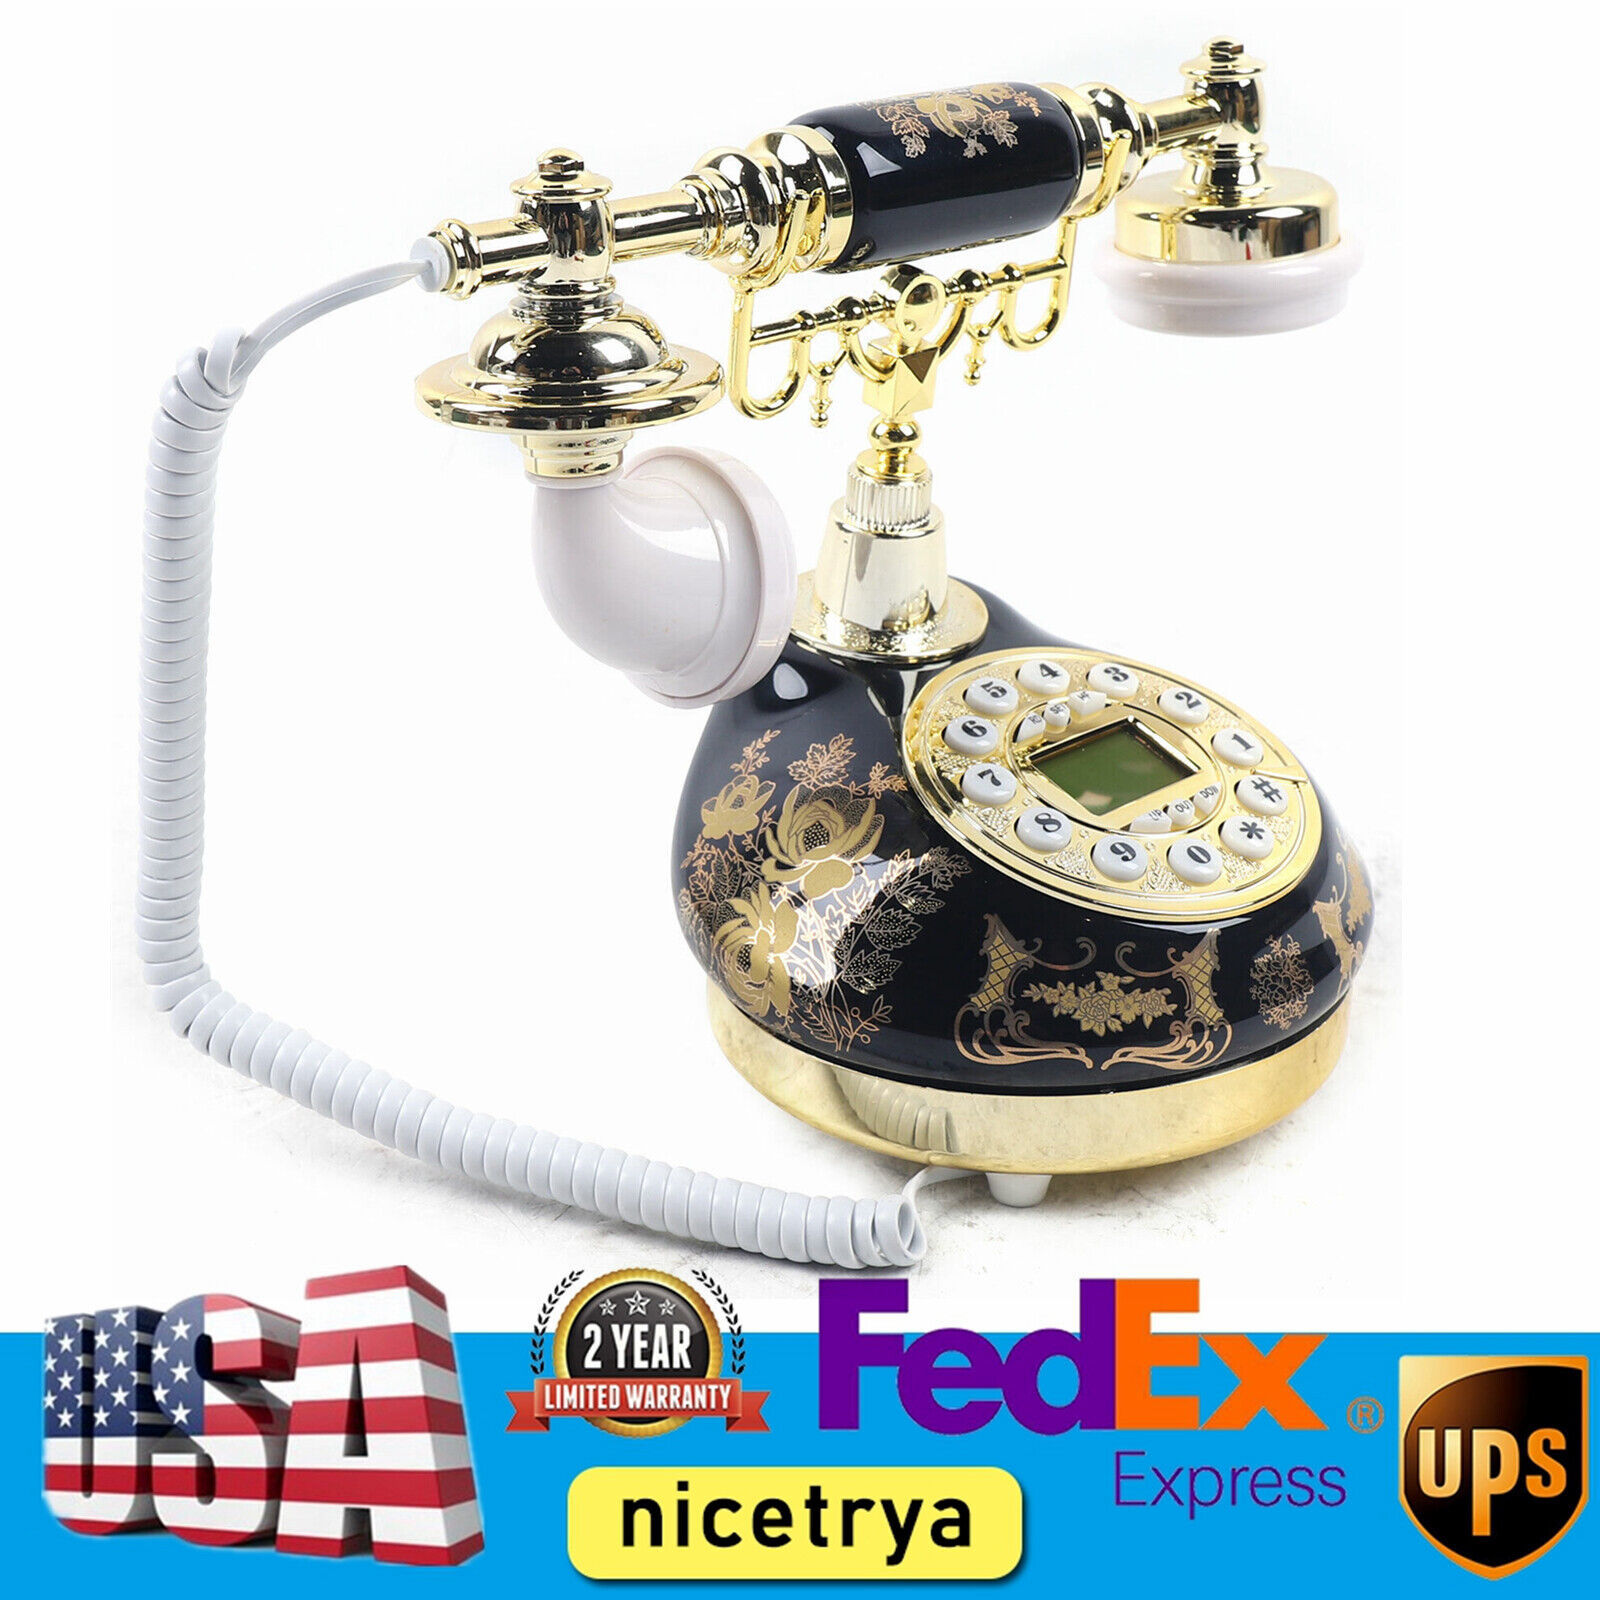 Vintage Style Button Telephone Phone Real Working Vintage Old Fashion Decor